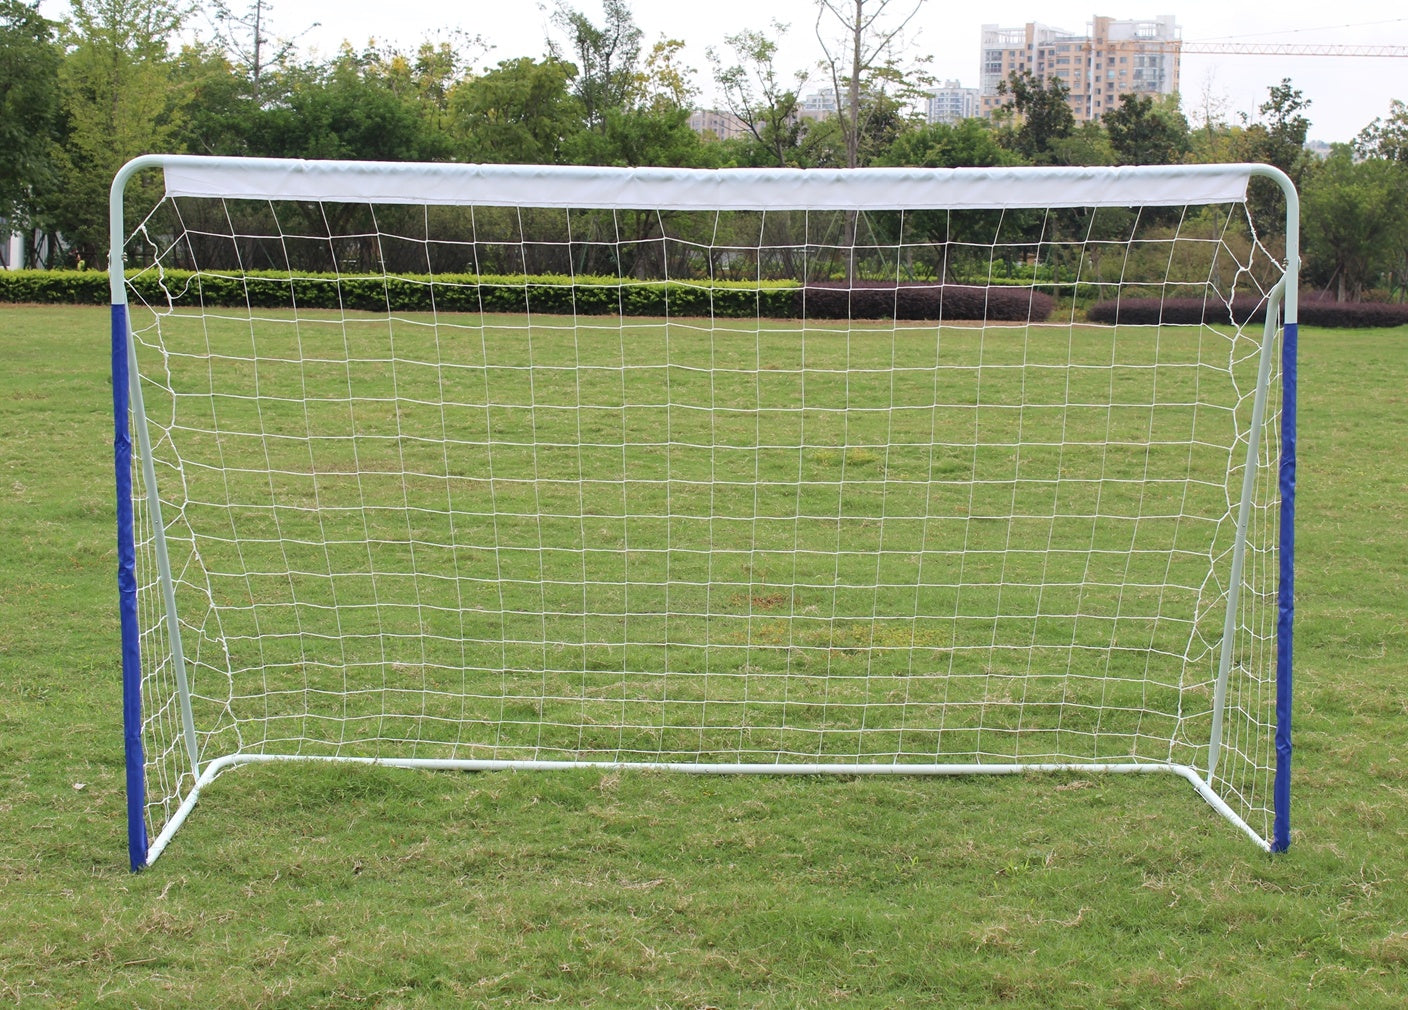 Home portable soccer gate Courtyard soccer match with nets storage for easy self-assembly